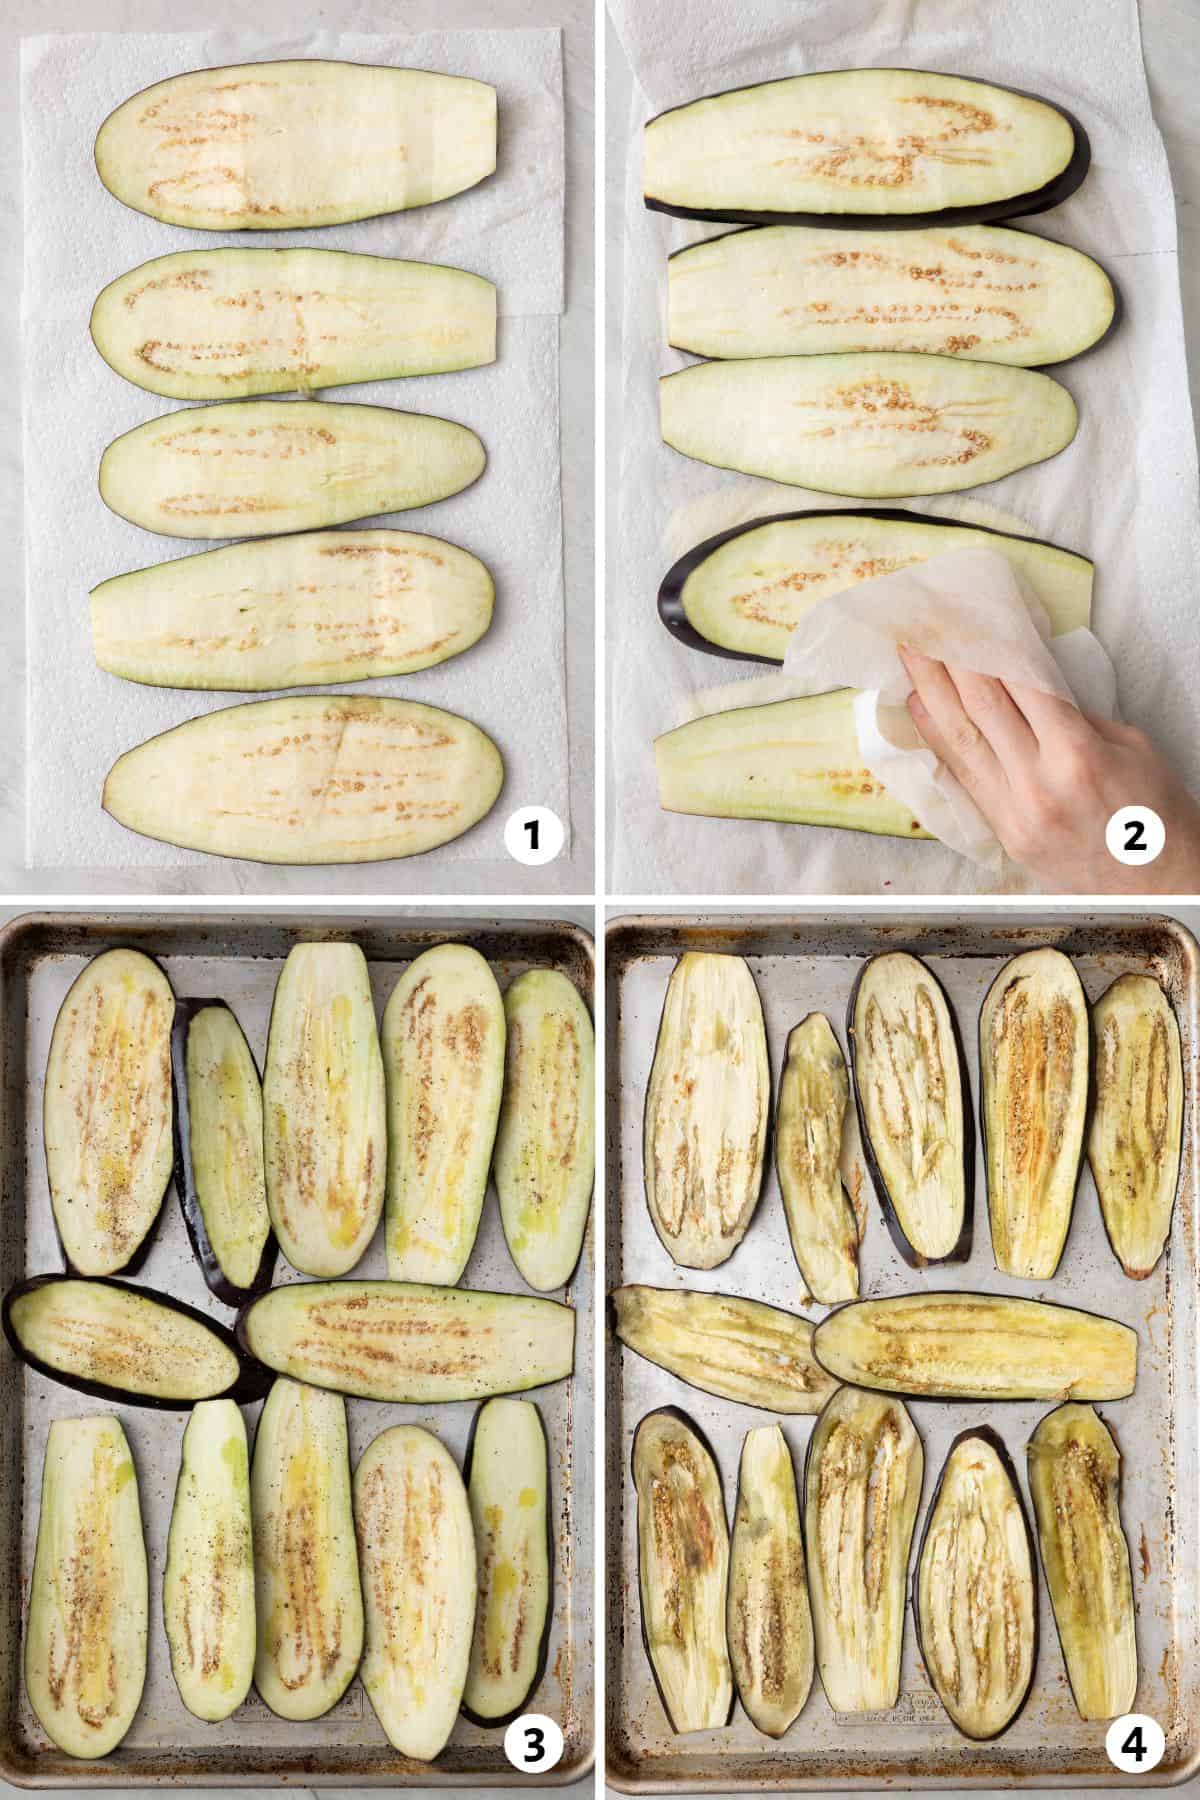 4 image collage preparing eggplant layer: 1- planks on a paper towel, 2- patting dry, 3- seasoned on a baking sheet before roasting, 4- after roasting.